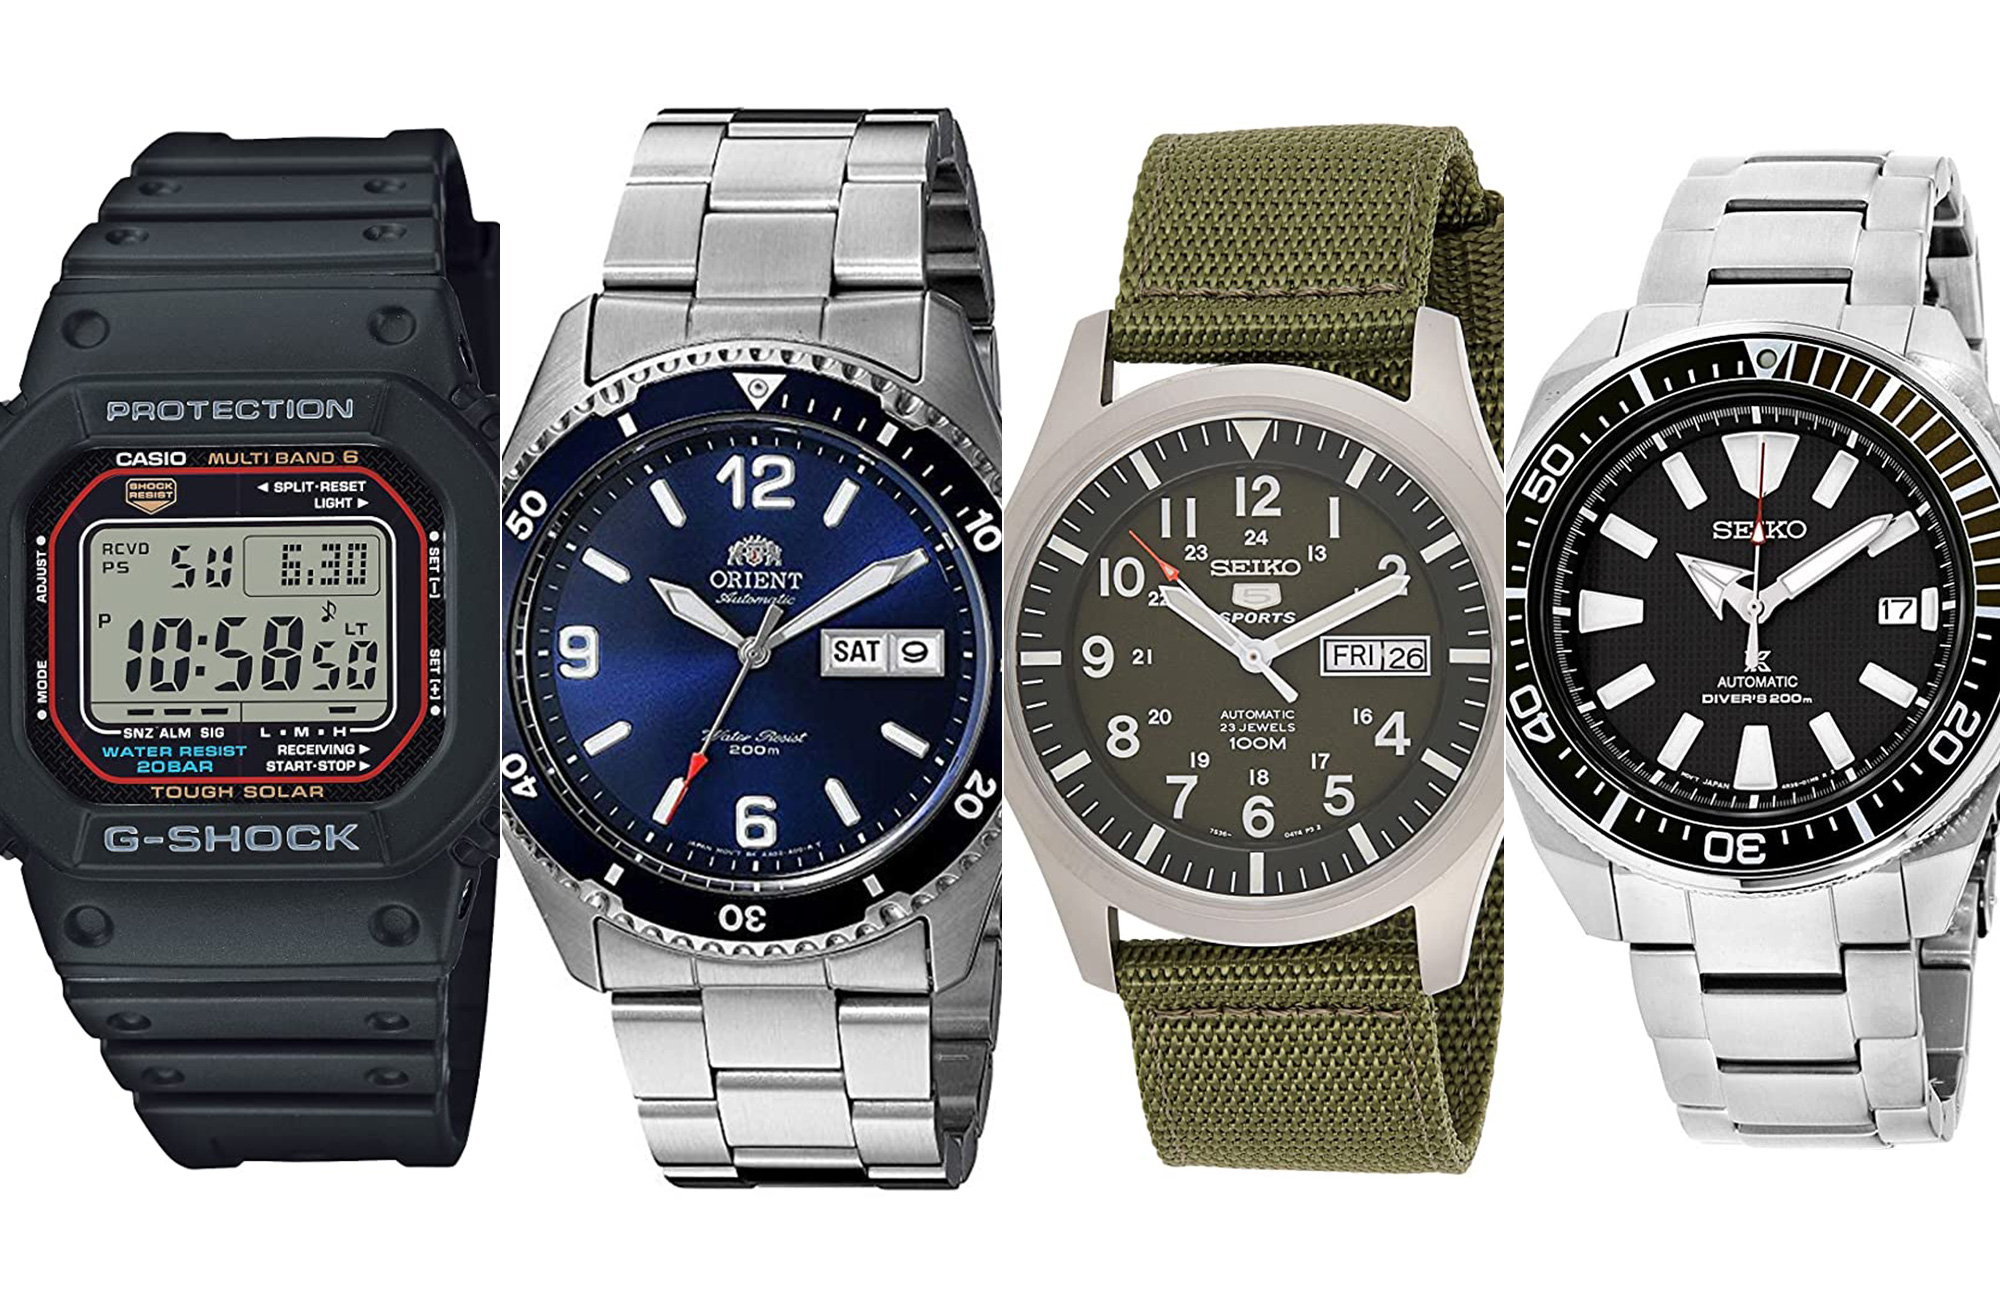 Are Japan watch brands best budget watch makers in last decades?